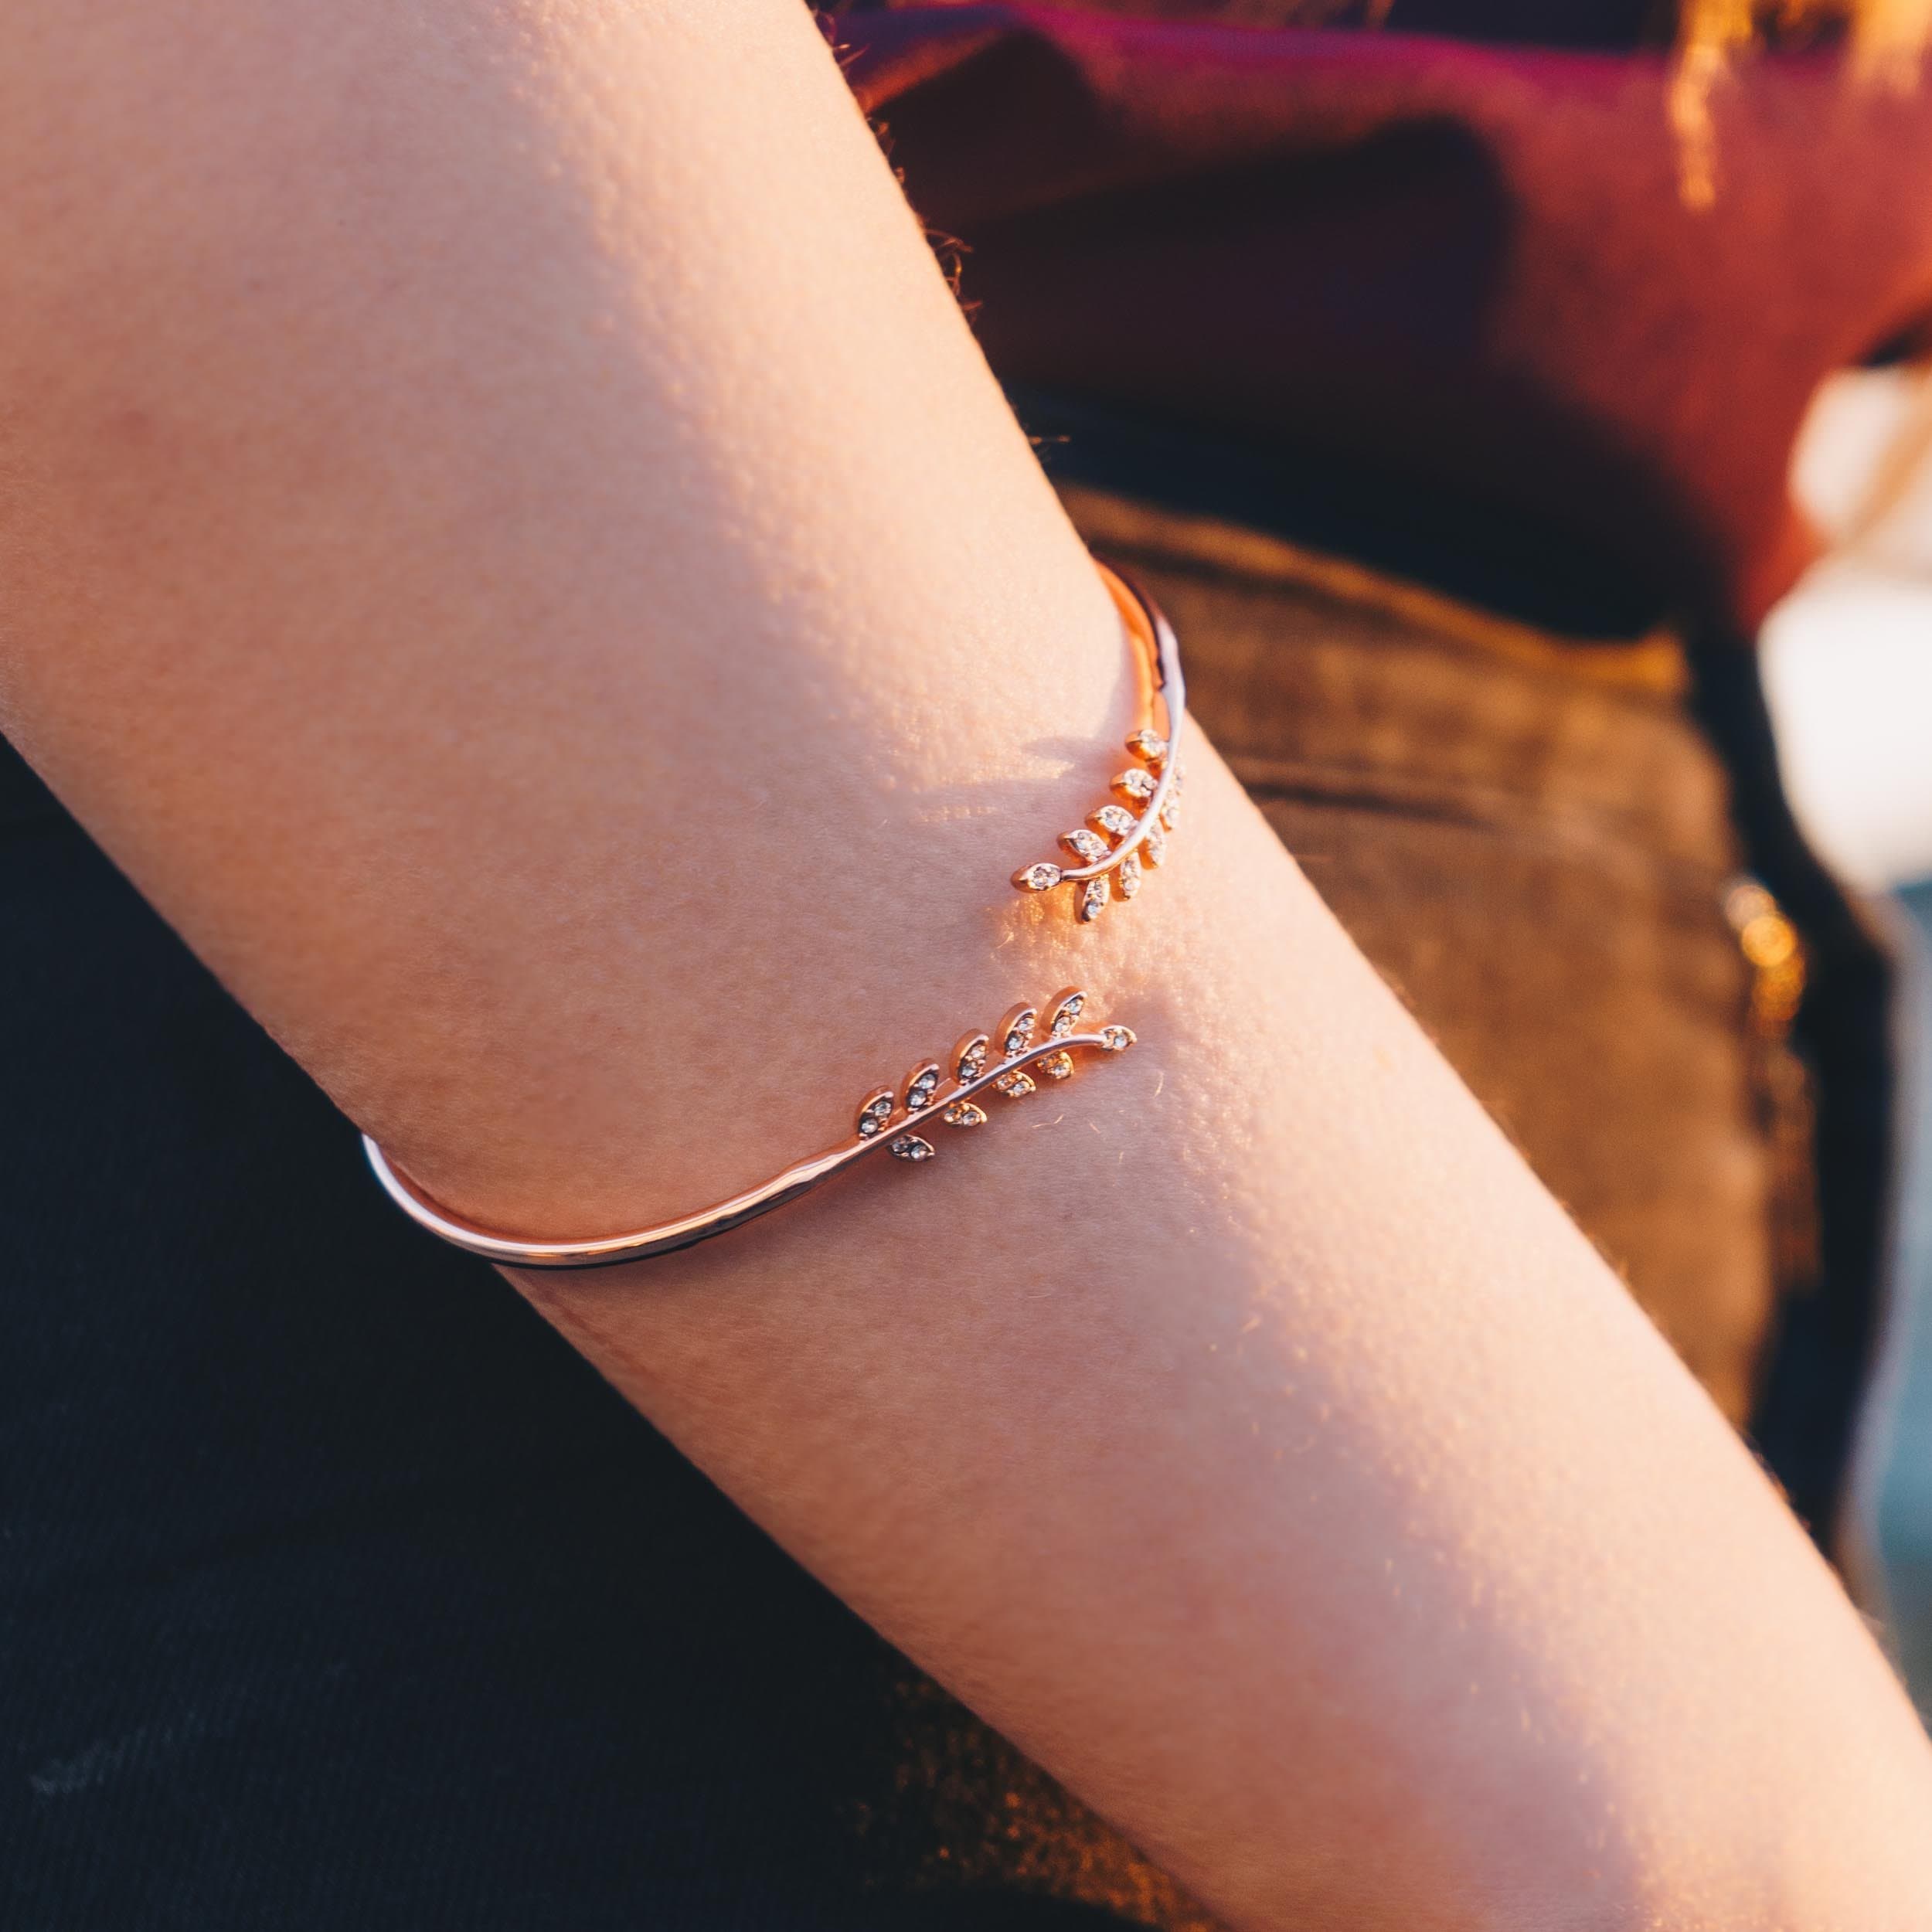 Rose Gold Plated Leaf Bangle Created with Zircondia® Crystals